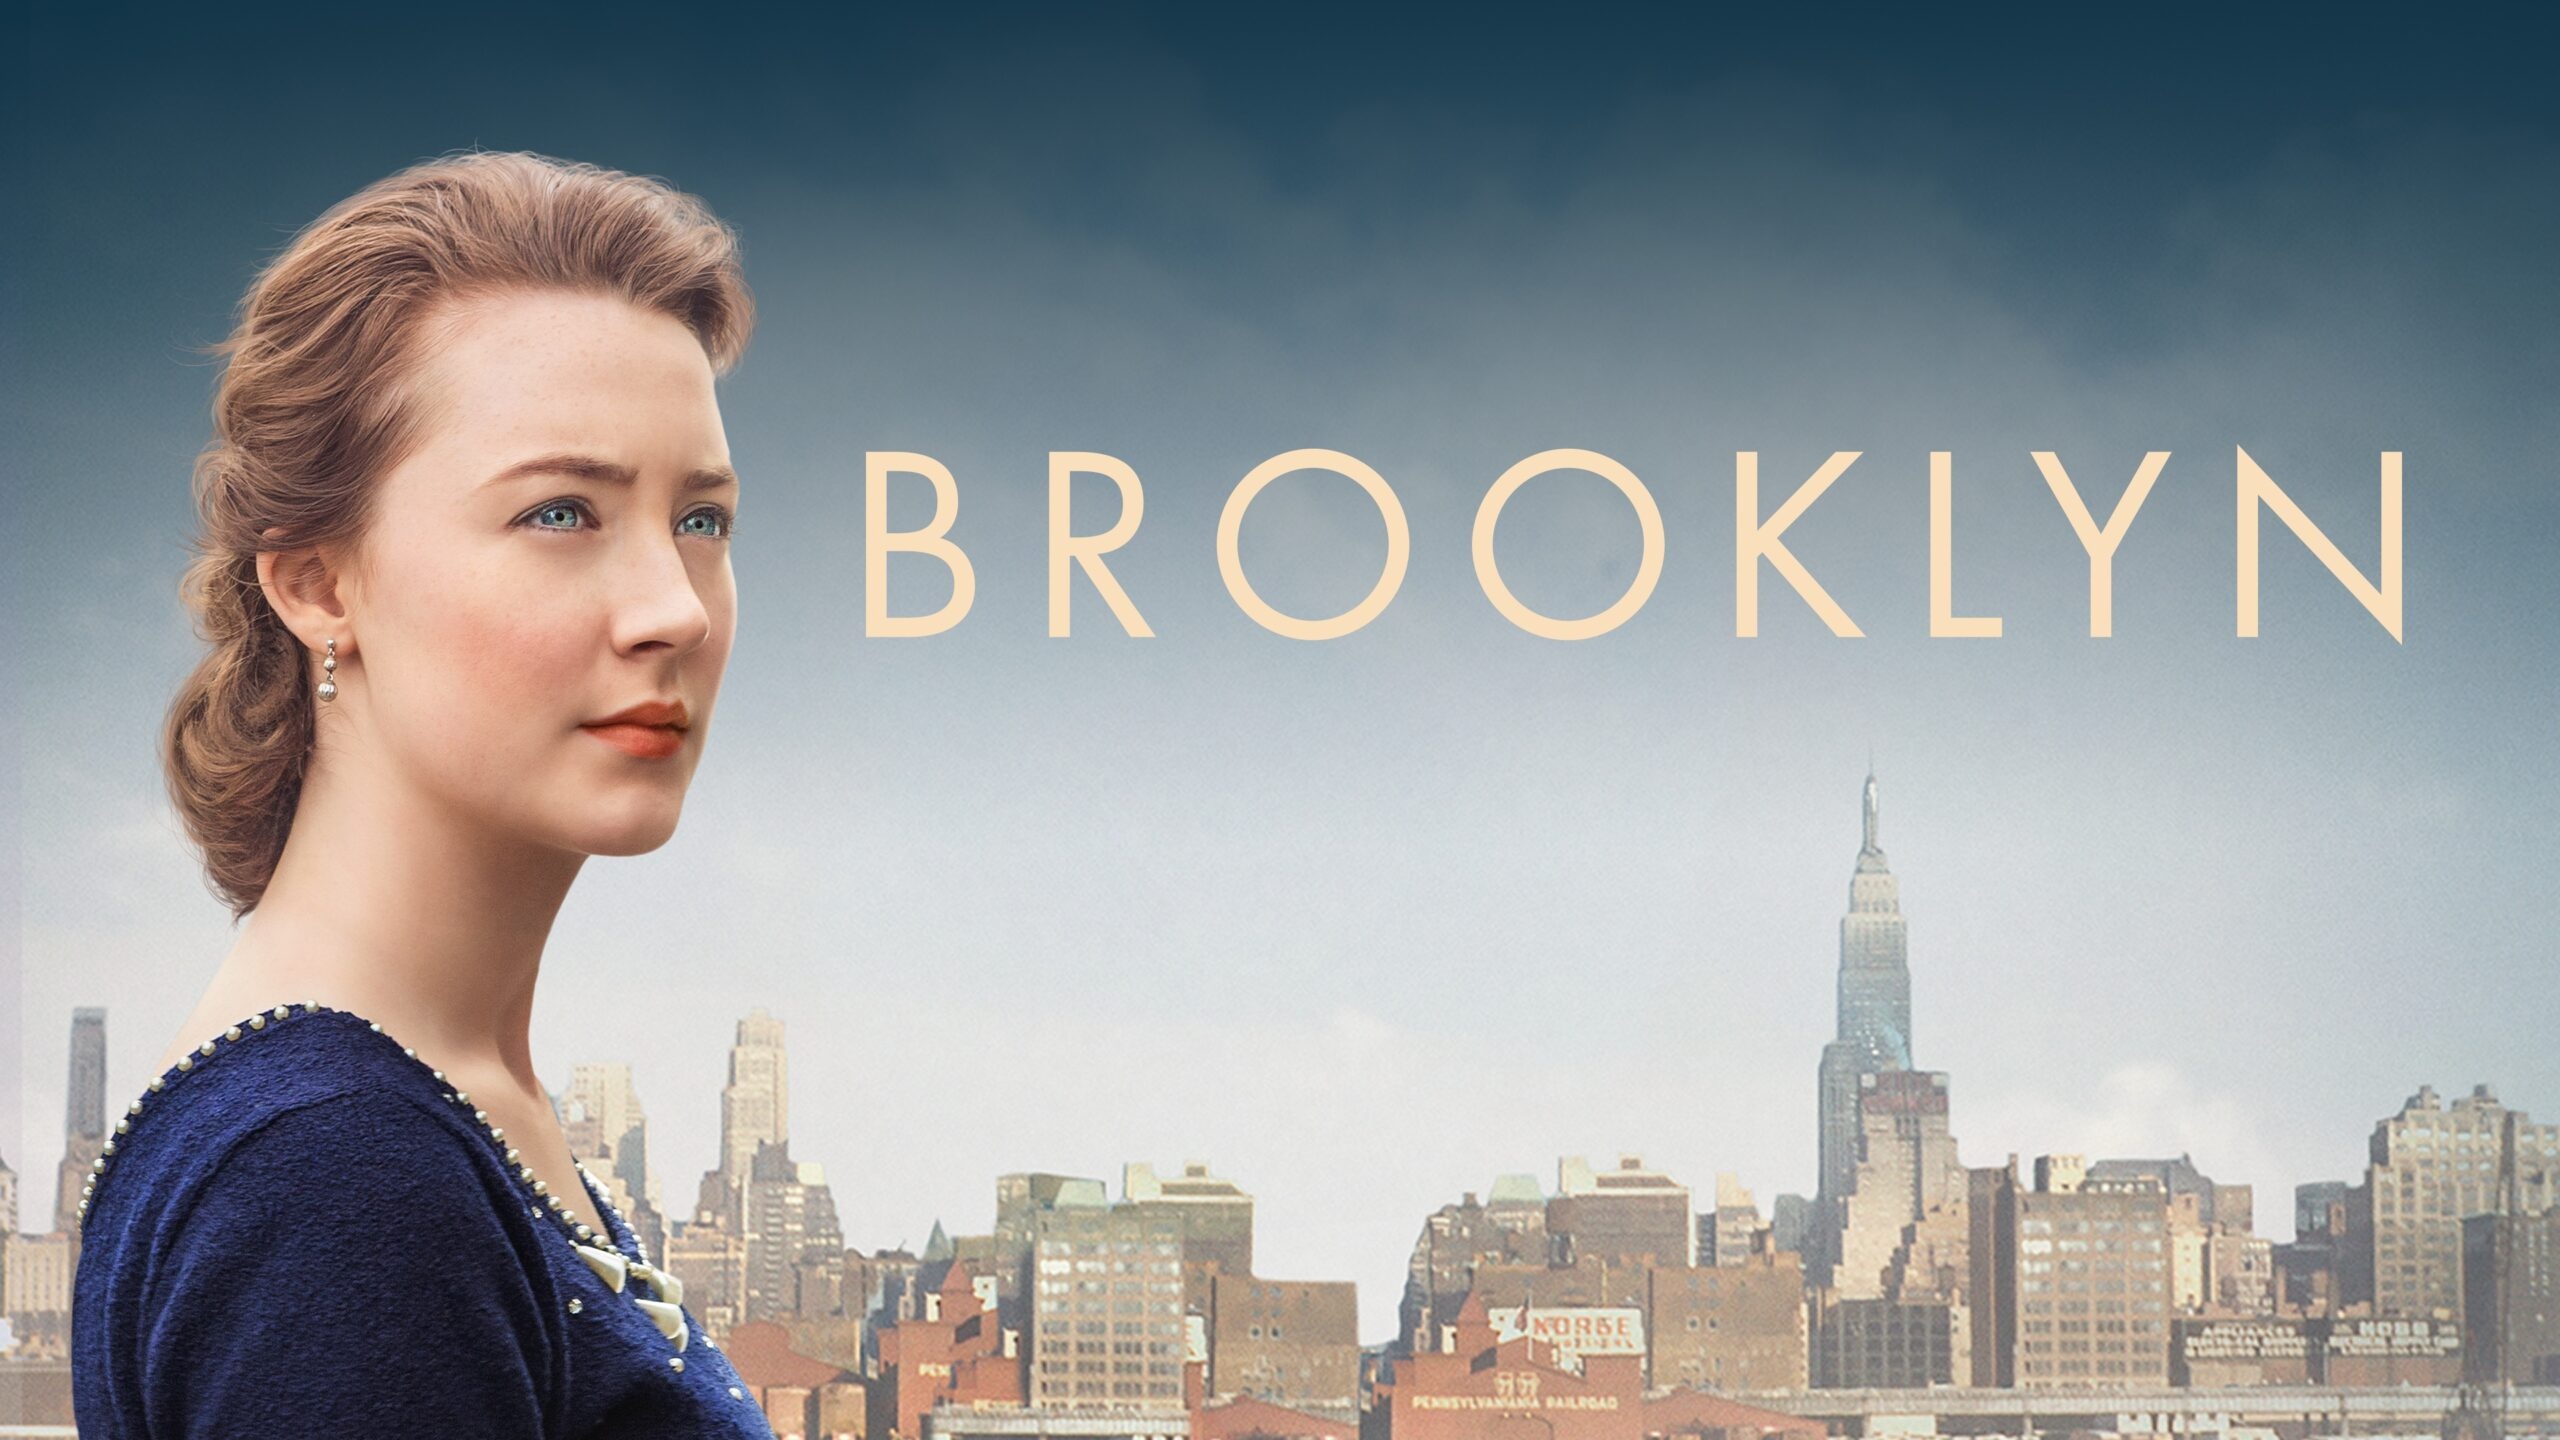 Brooklyn, Film review, Thought-provoking, Captivating storytelling, 2560x1440 HD Desktop